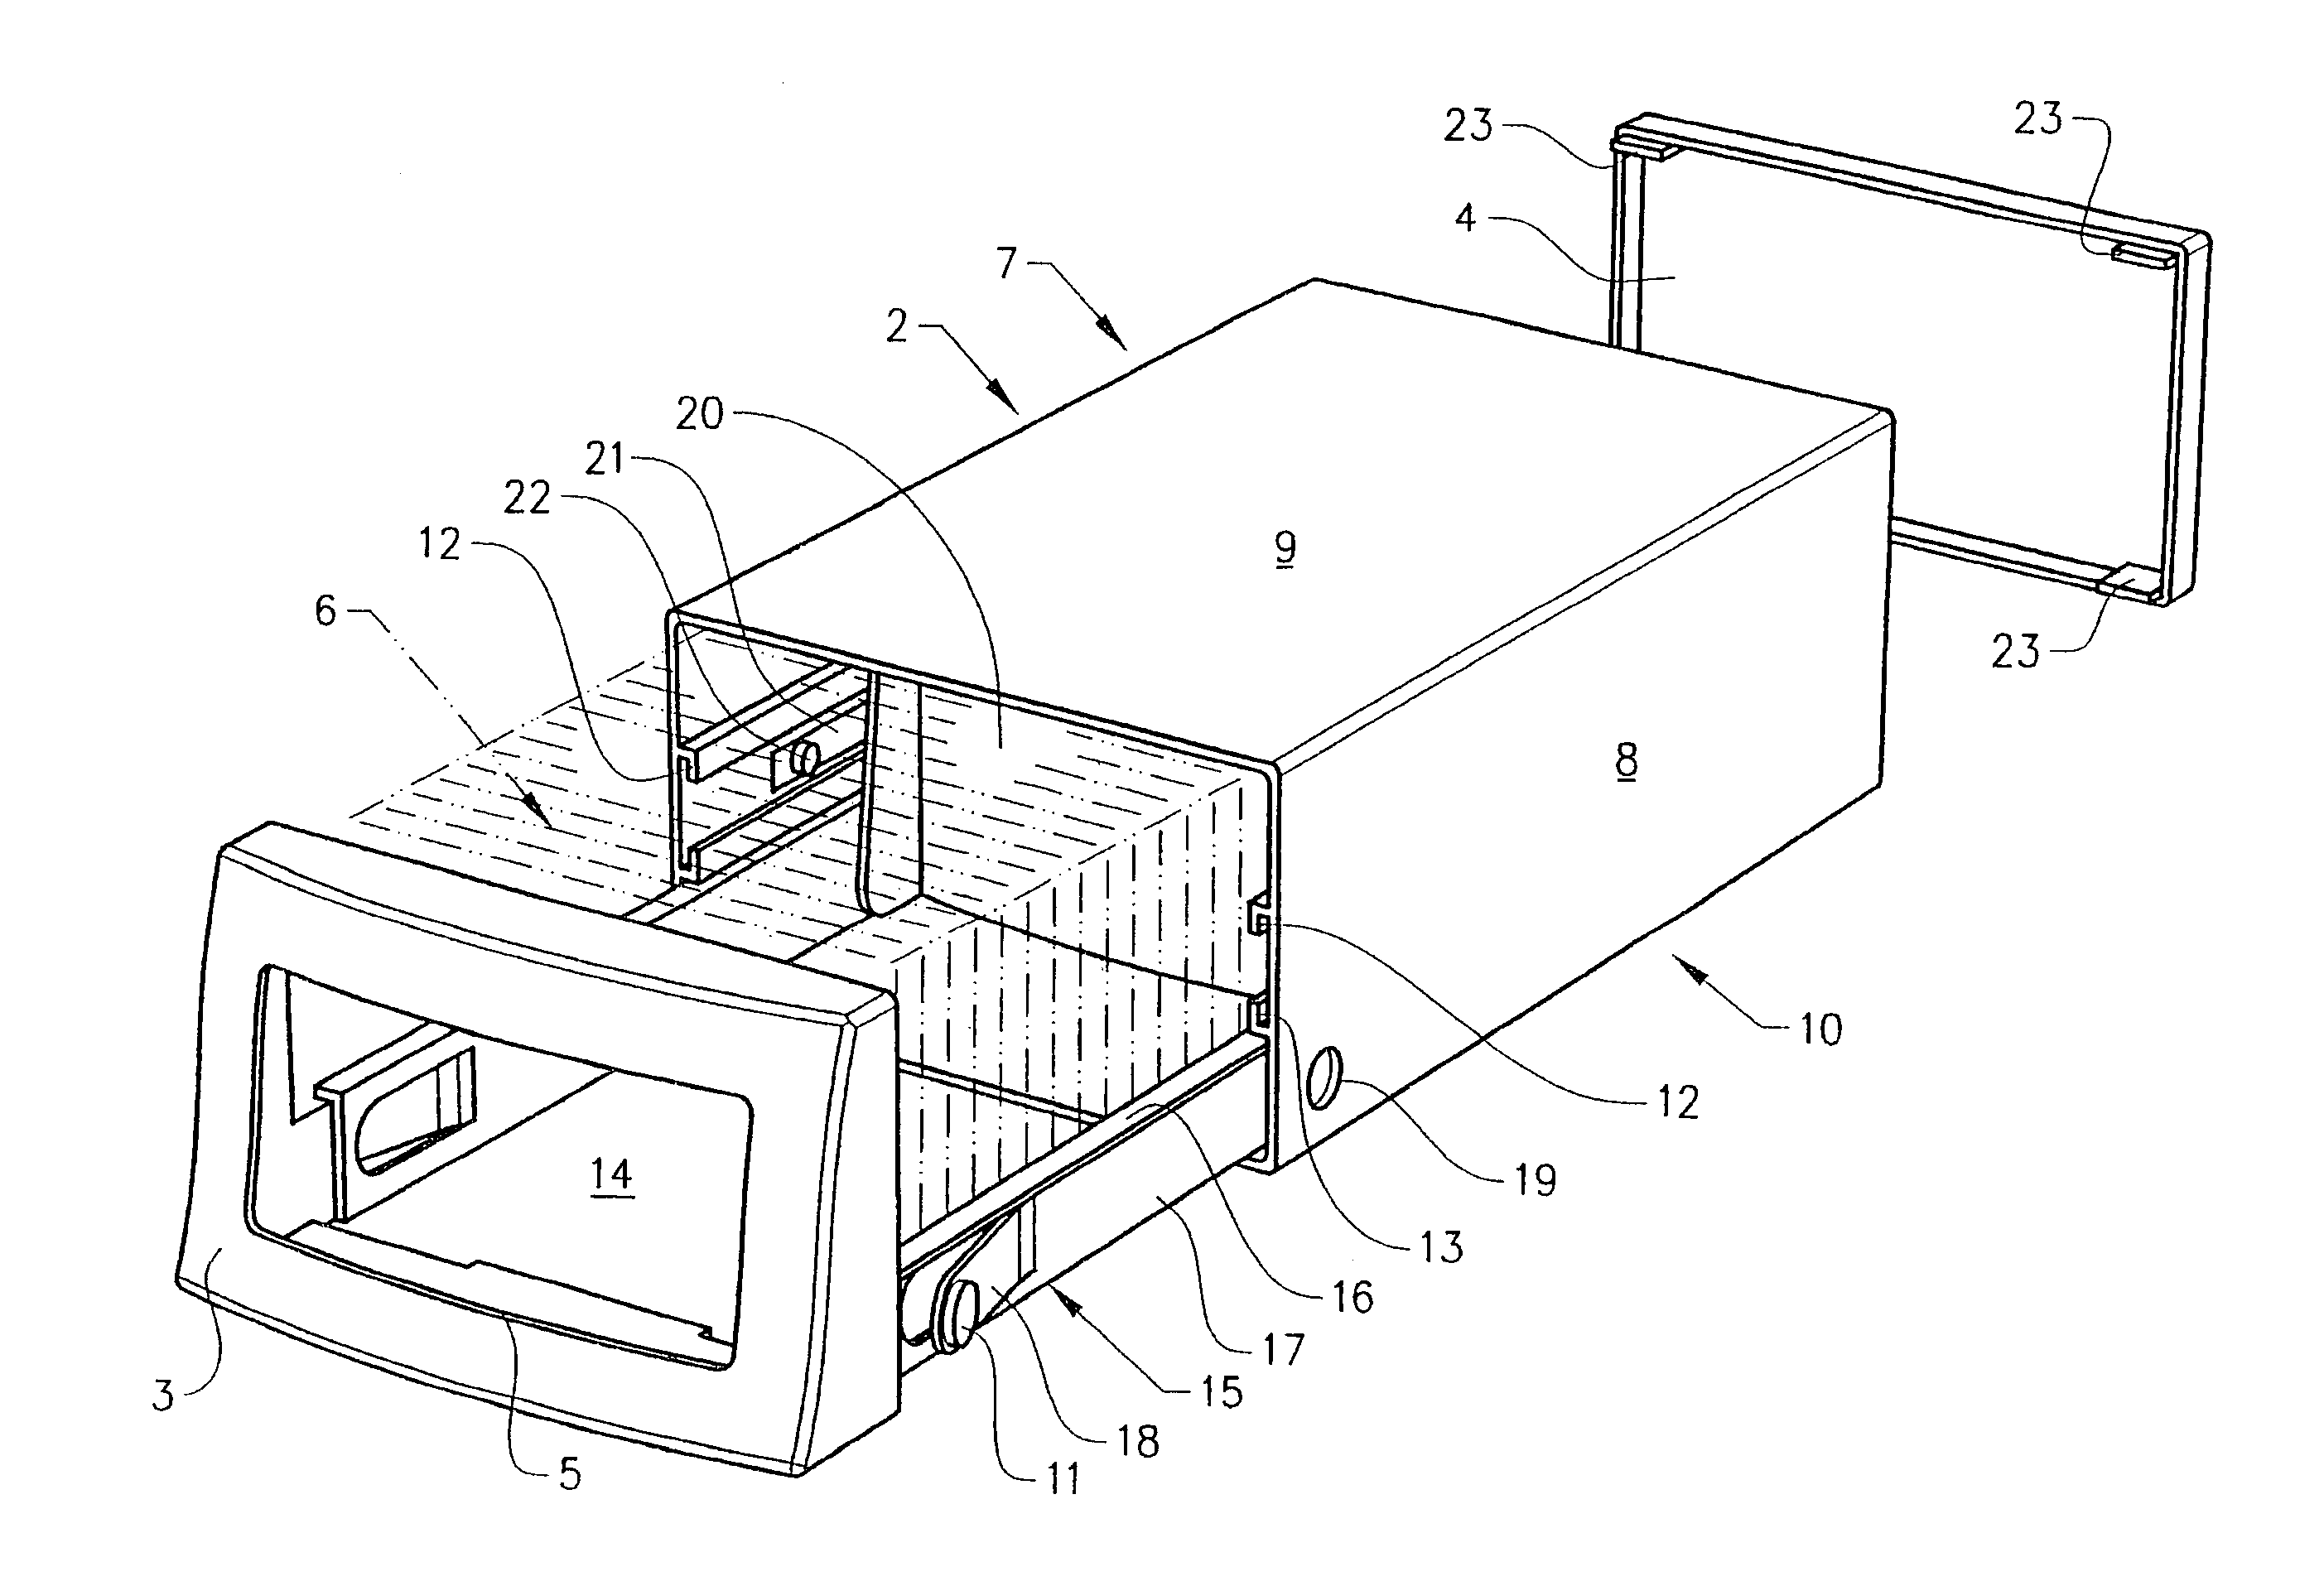 Apparatus for serially dispensing folder sheet products